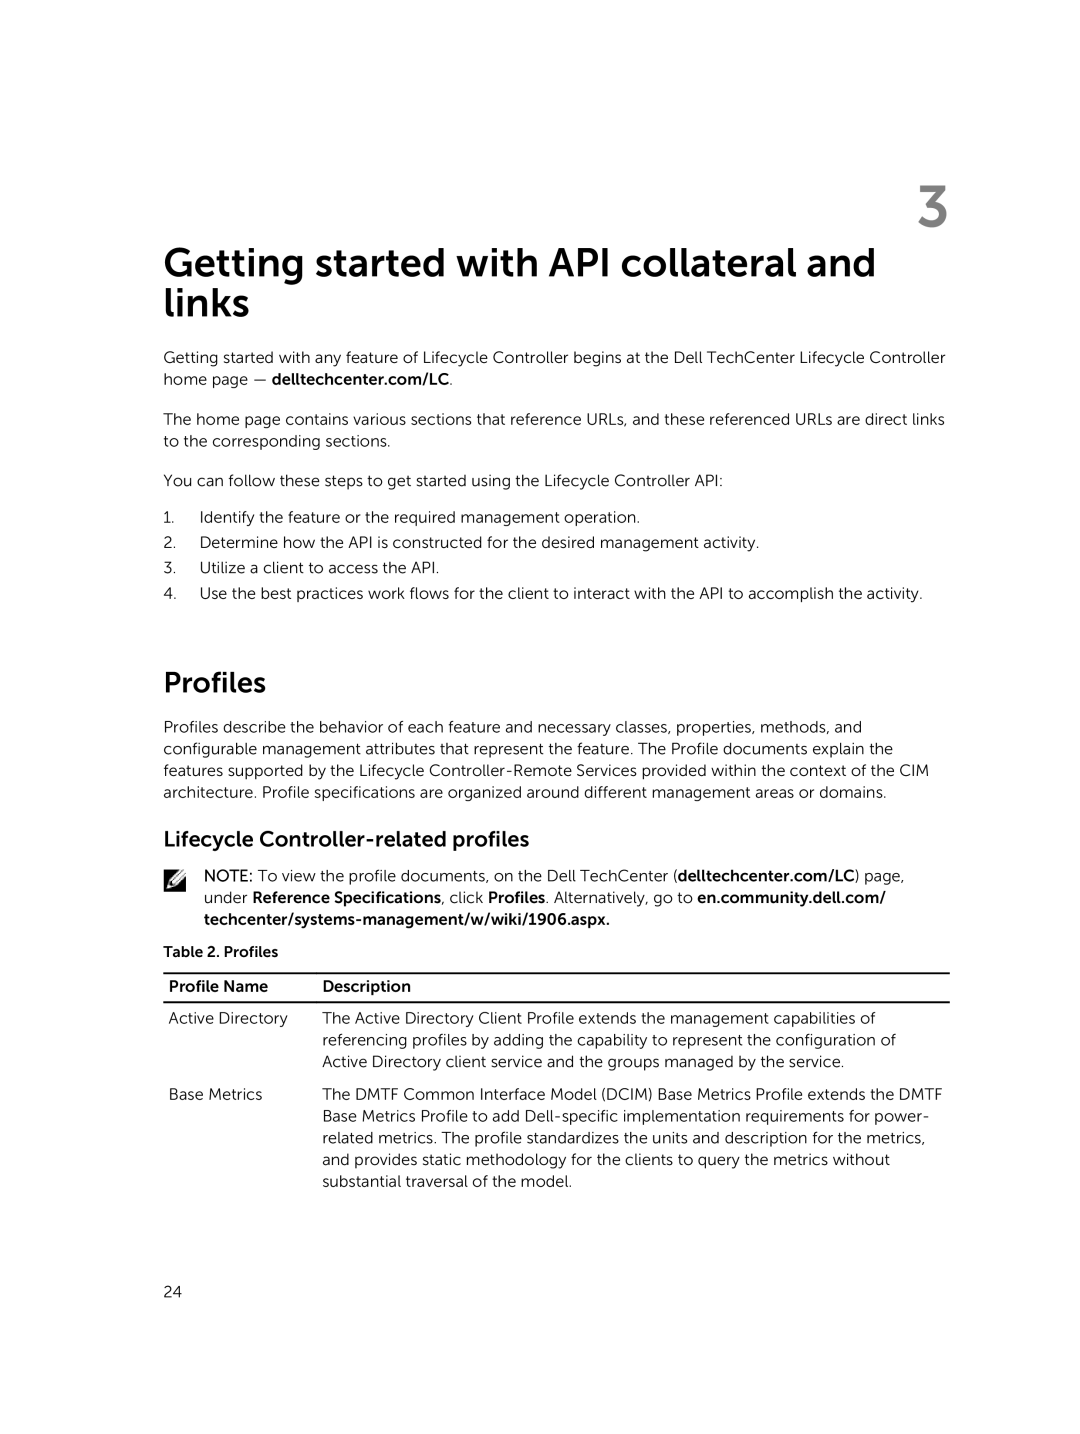 Dell v2.10.10.10 quick start Getting started with API collateral and links, Profiles, Lifecycle Controller-related profiles 